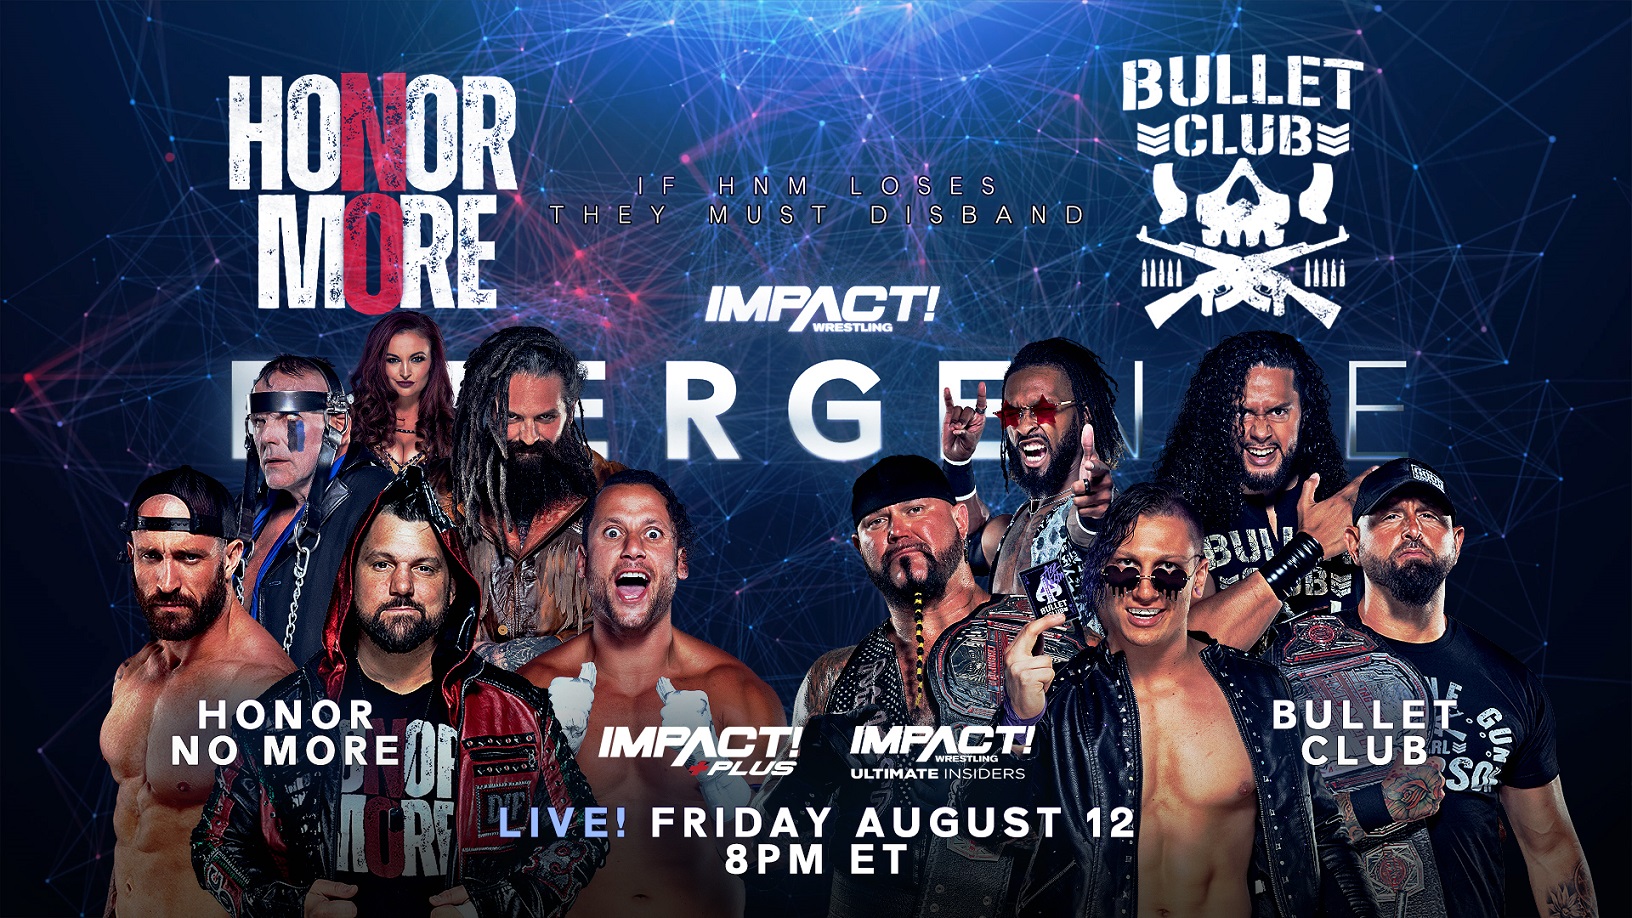 High-Stakes Showdown Between Honor No More & Bullet Club Set for Emergence